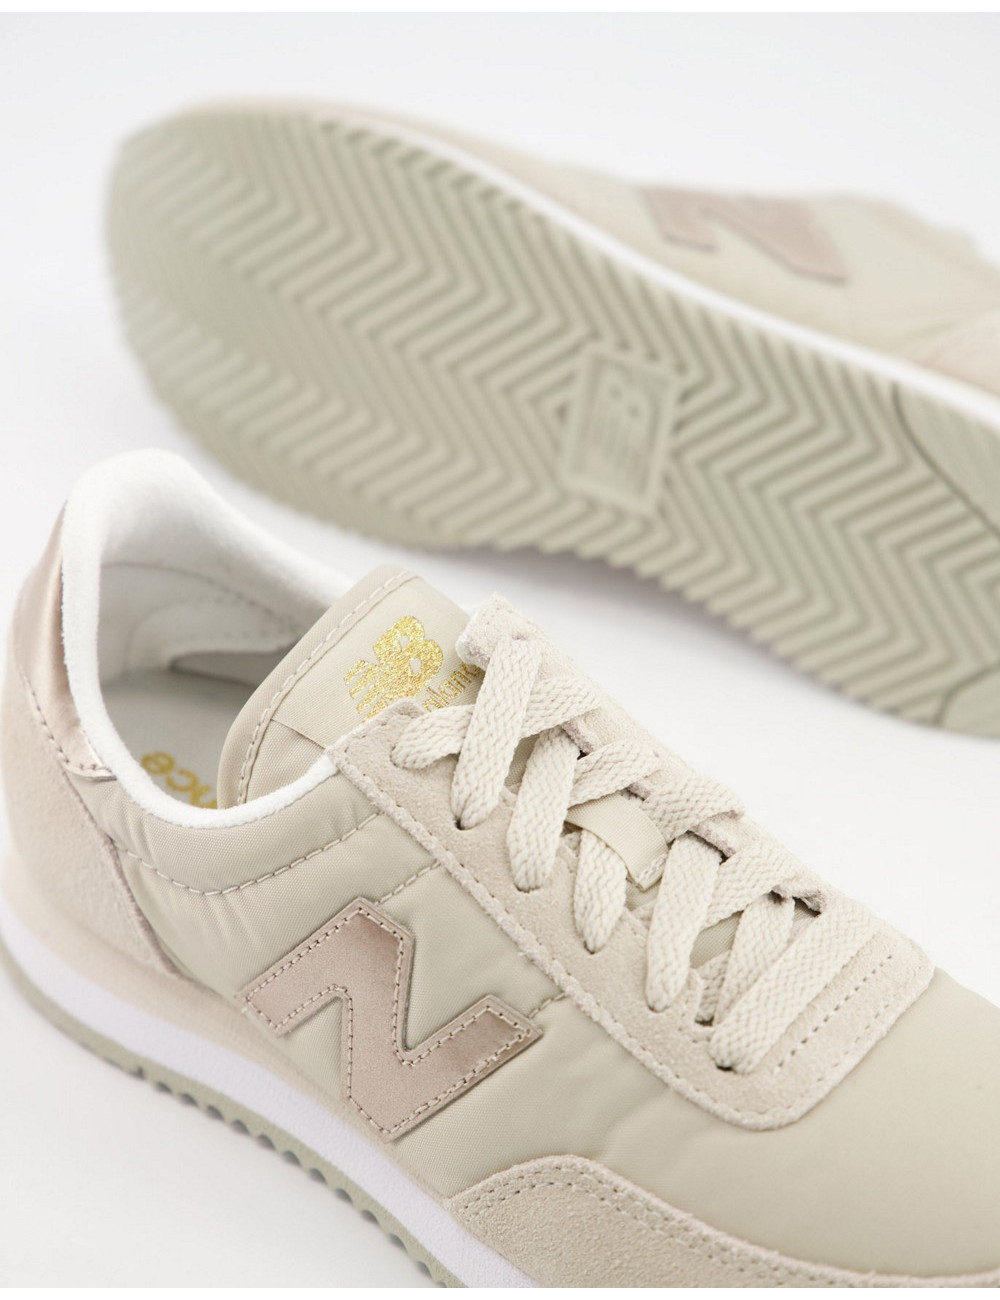 New Balance 720 trainers in...